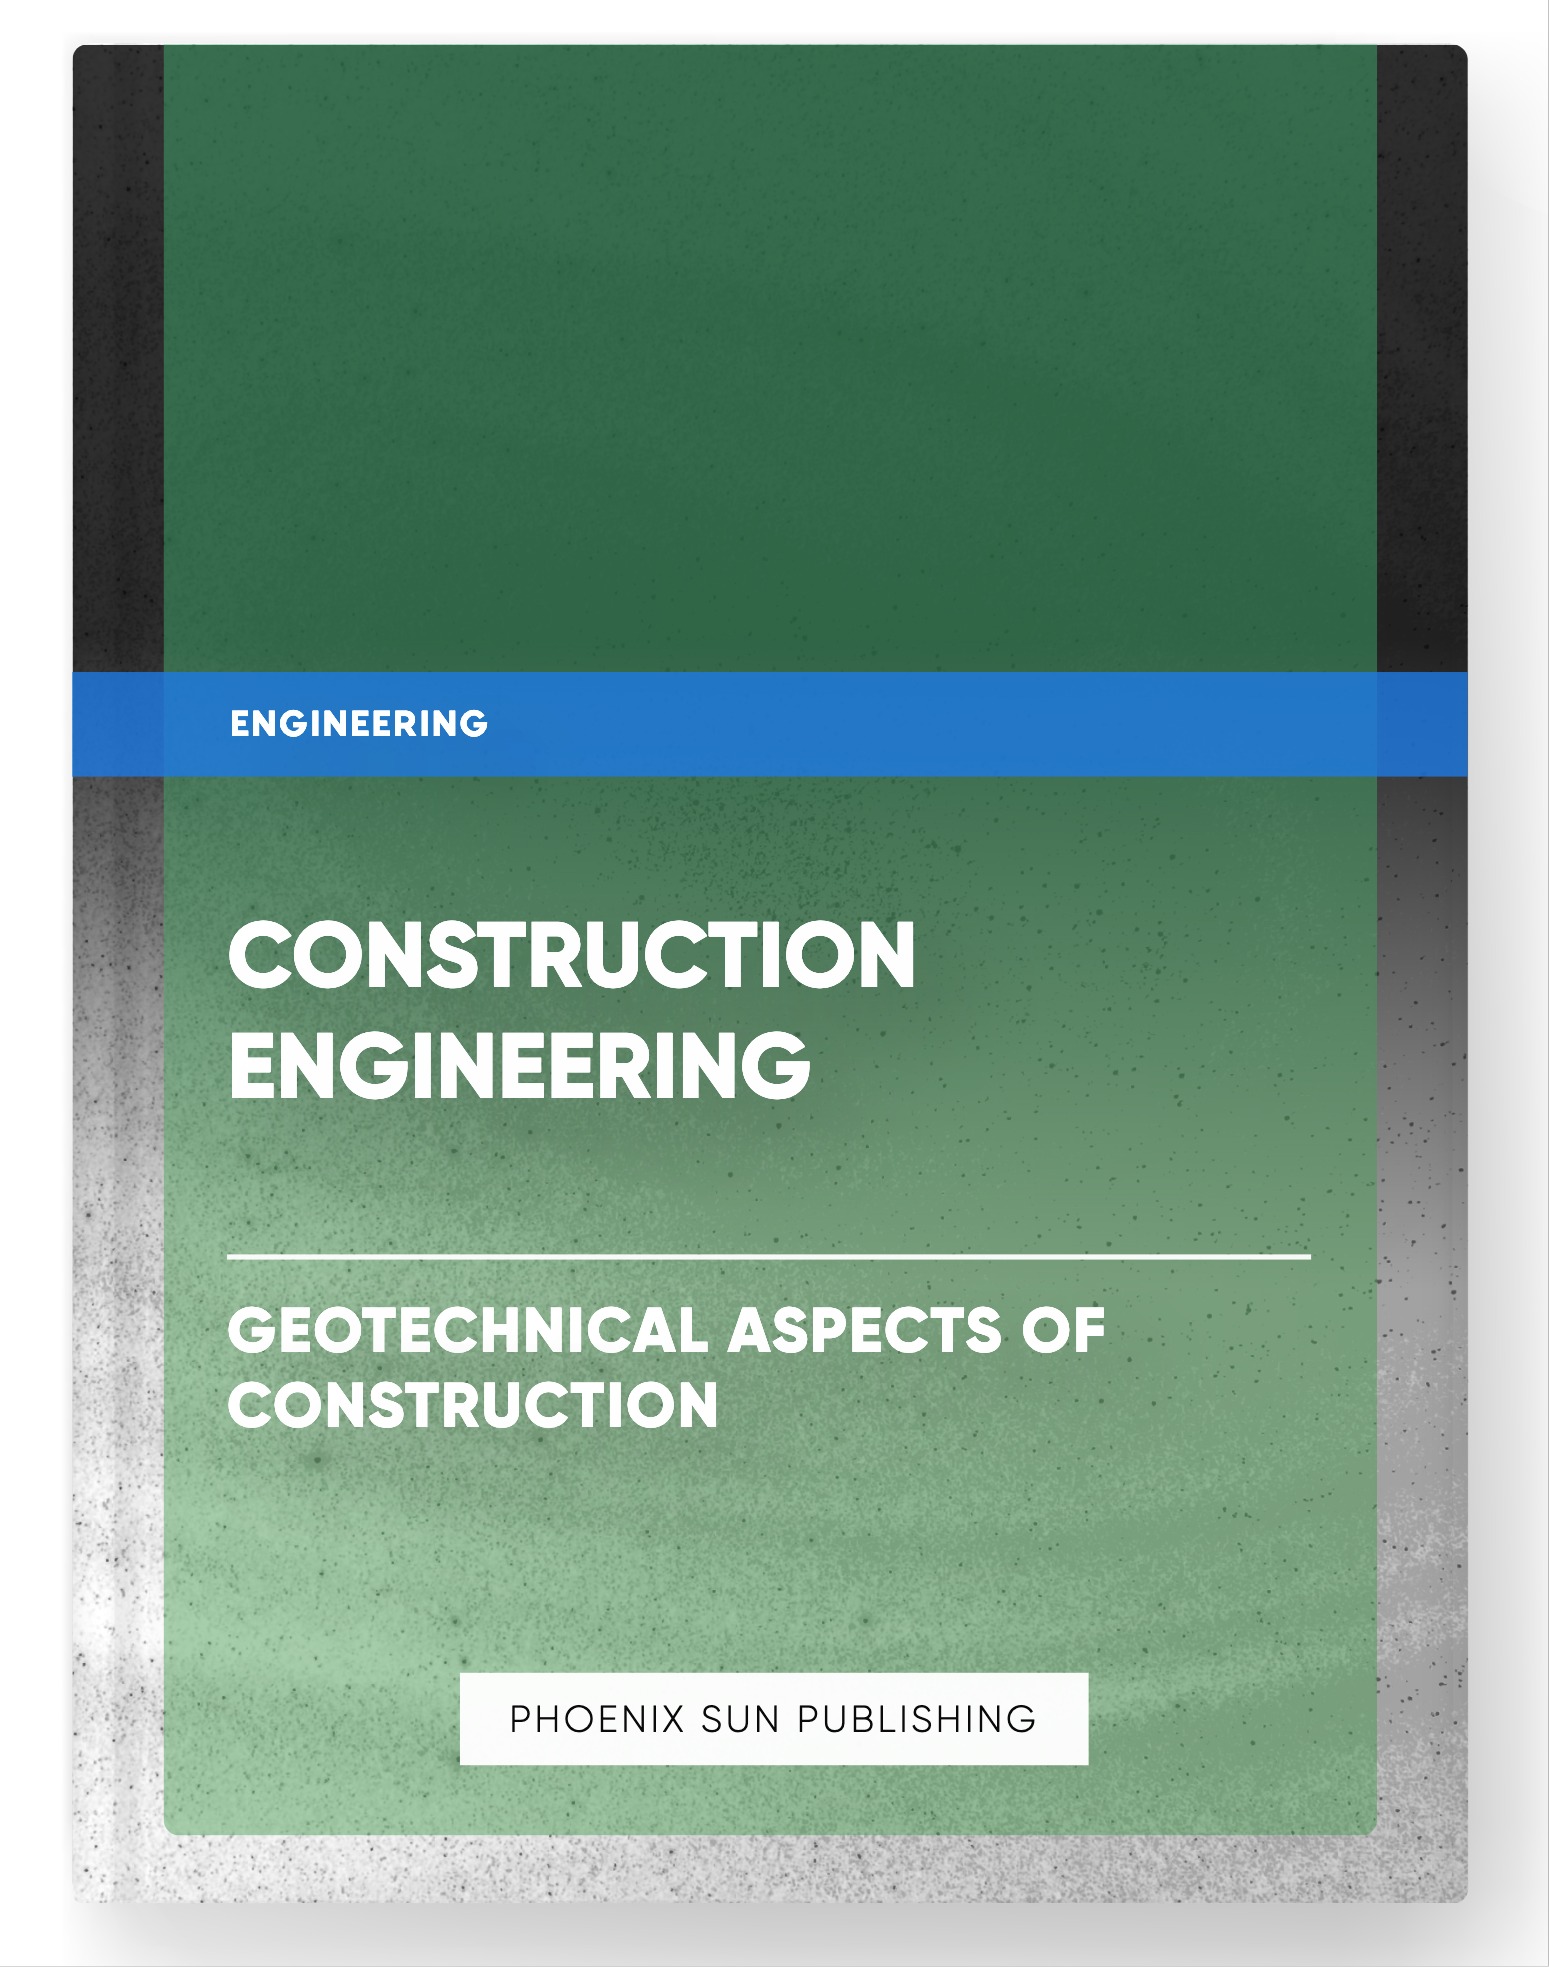 Construction Engineering – Geotechnical Aspects of Construction